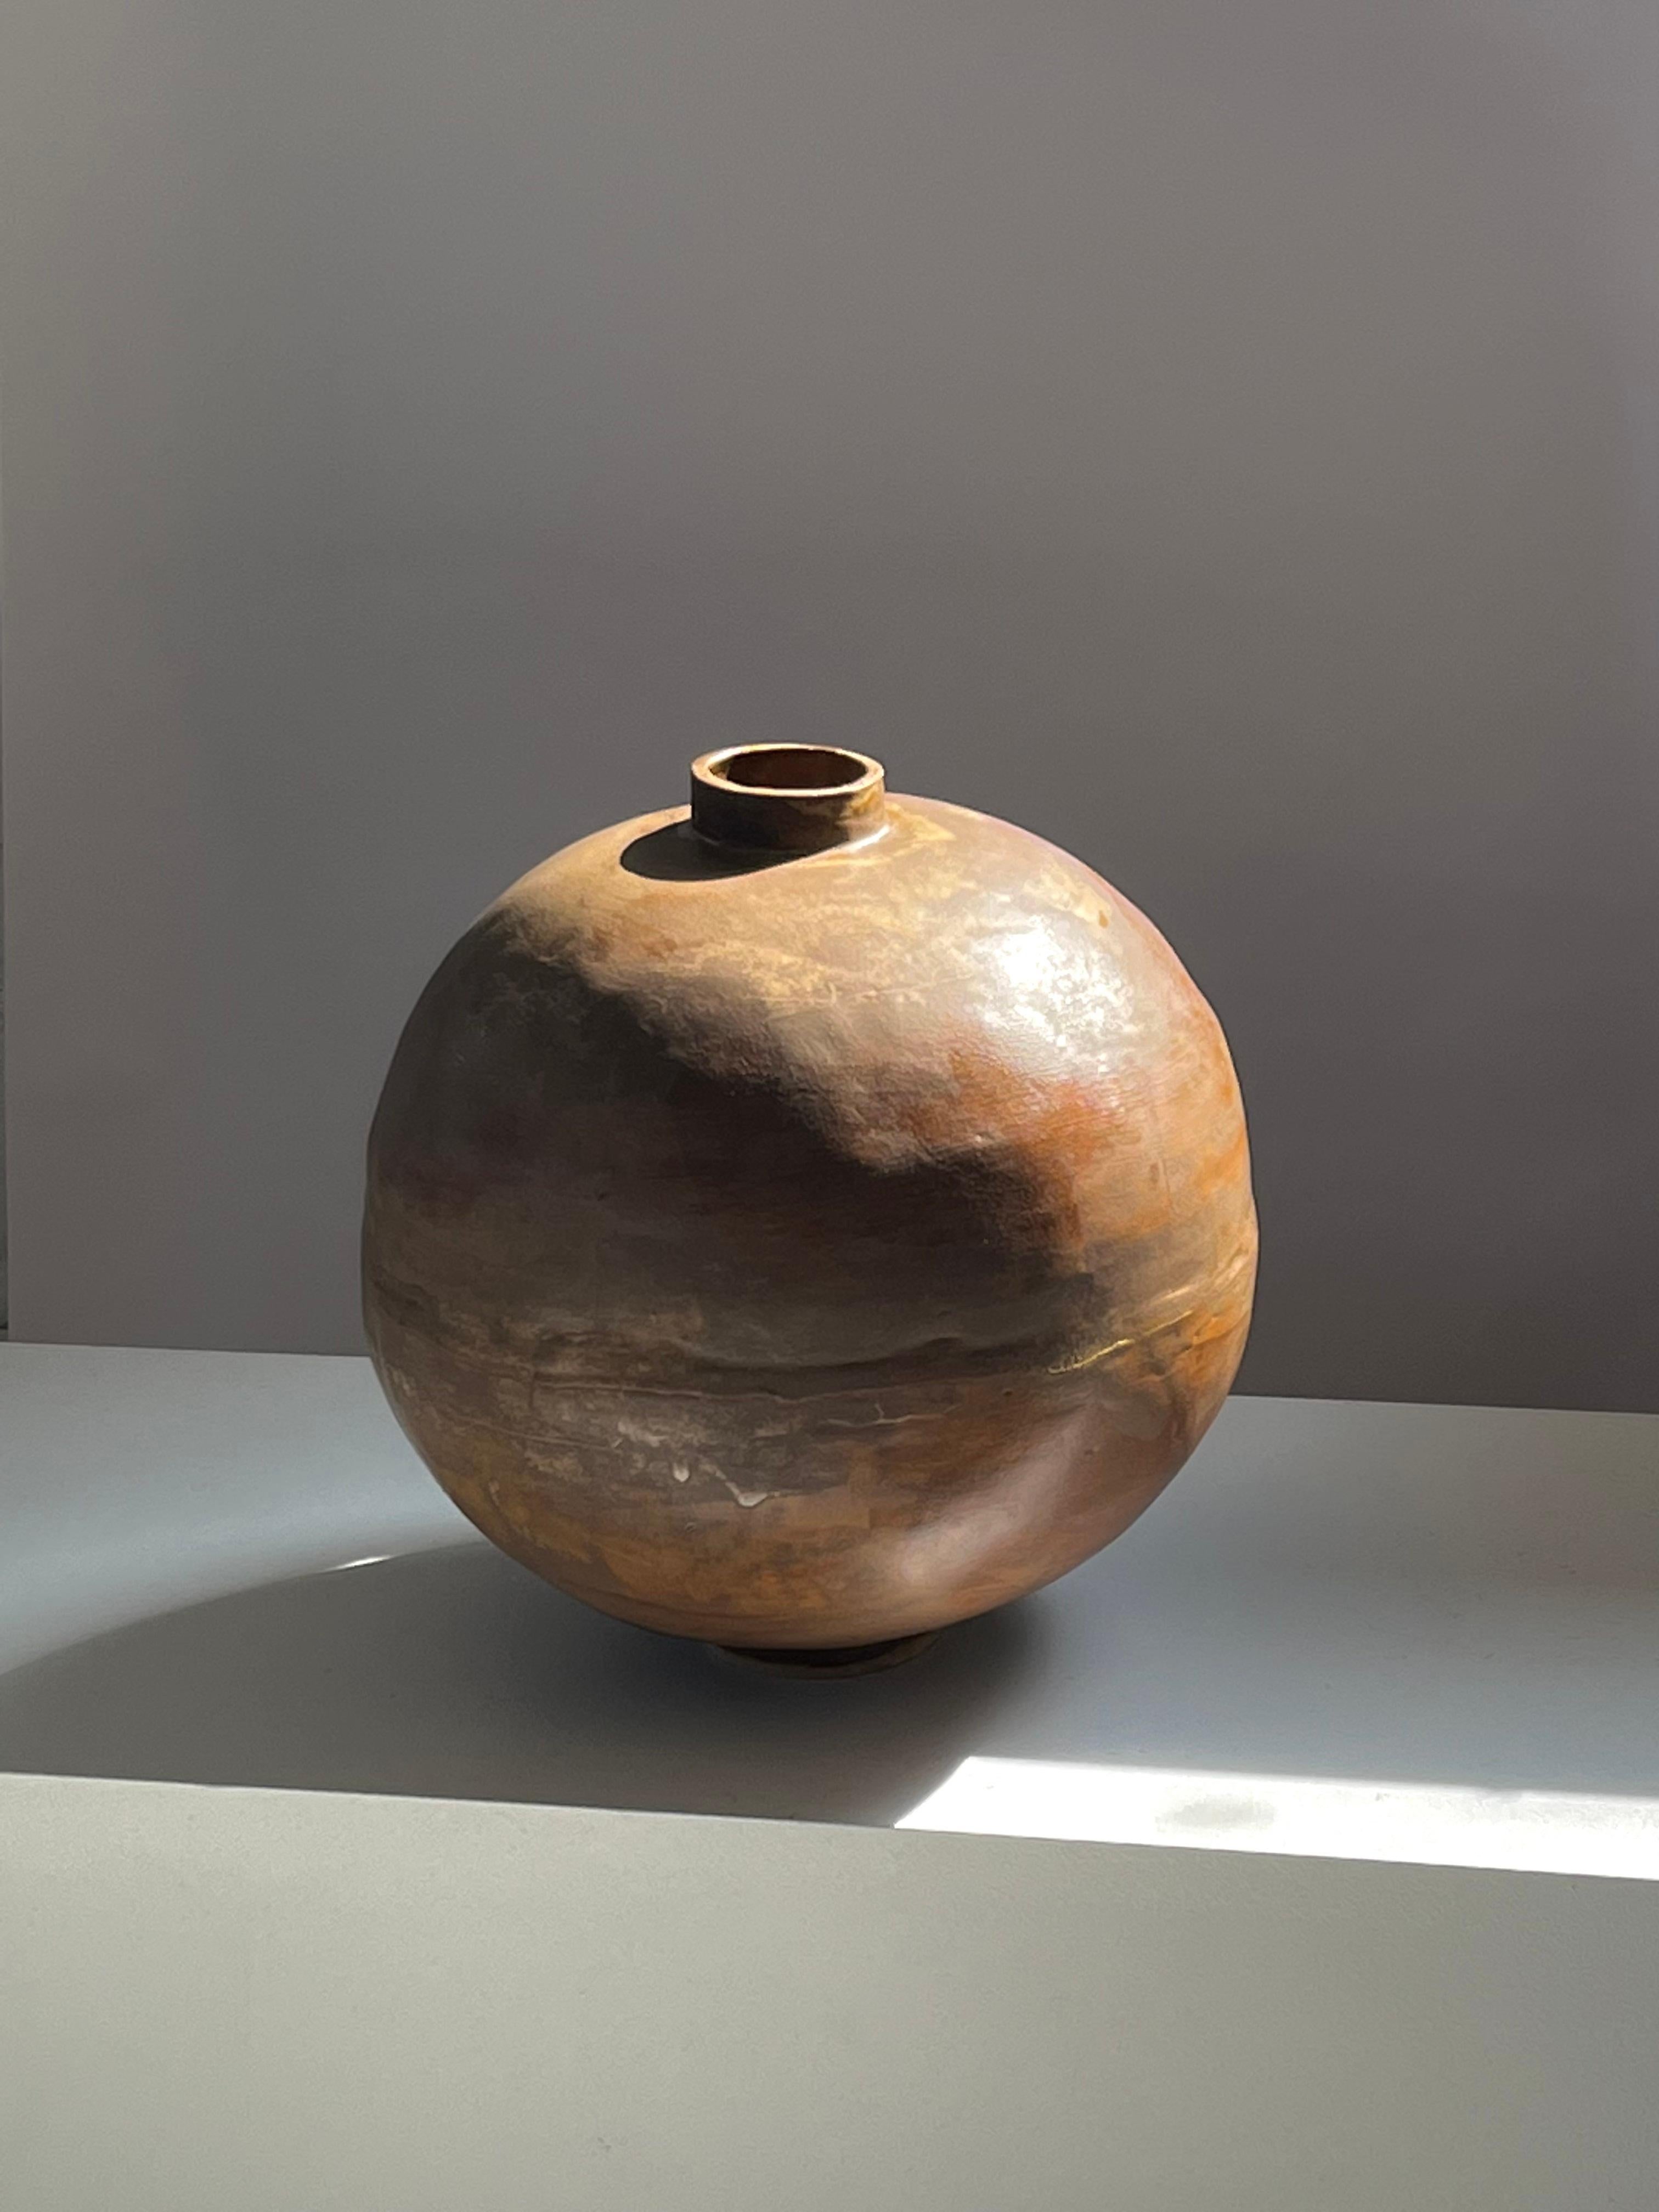 Moon jar in gloss by Solem Ceramics
Dimensions: Ø 42 x H 42 cm.
Materials: Red stoneware, white slip, glaze.
This Jar is also available in Raw and Obsidian finishes.

Solem’s work pulls from memories of the architecture and community within